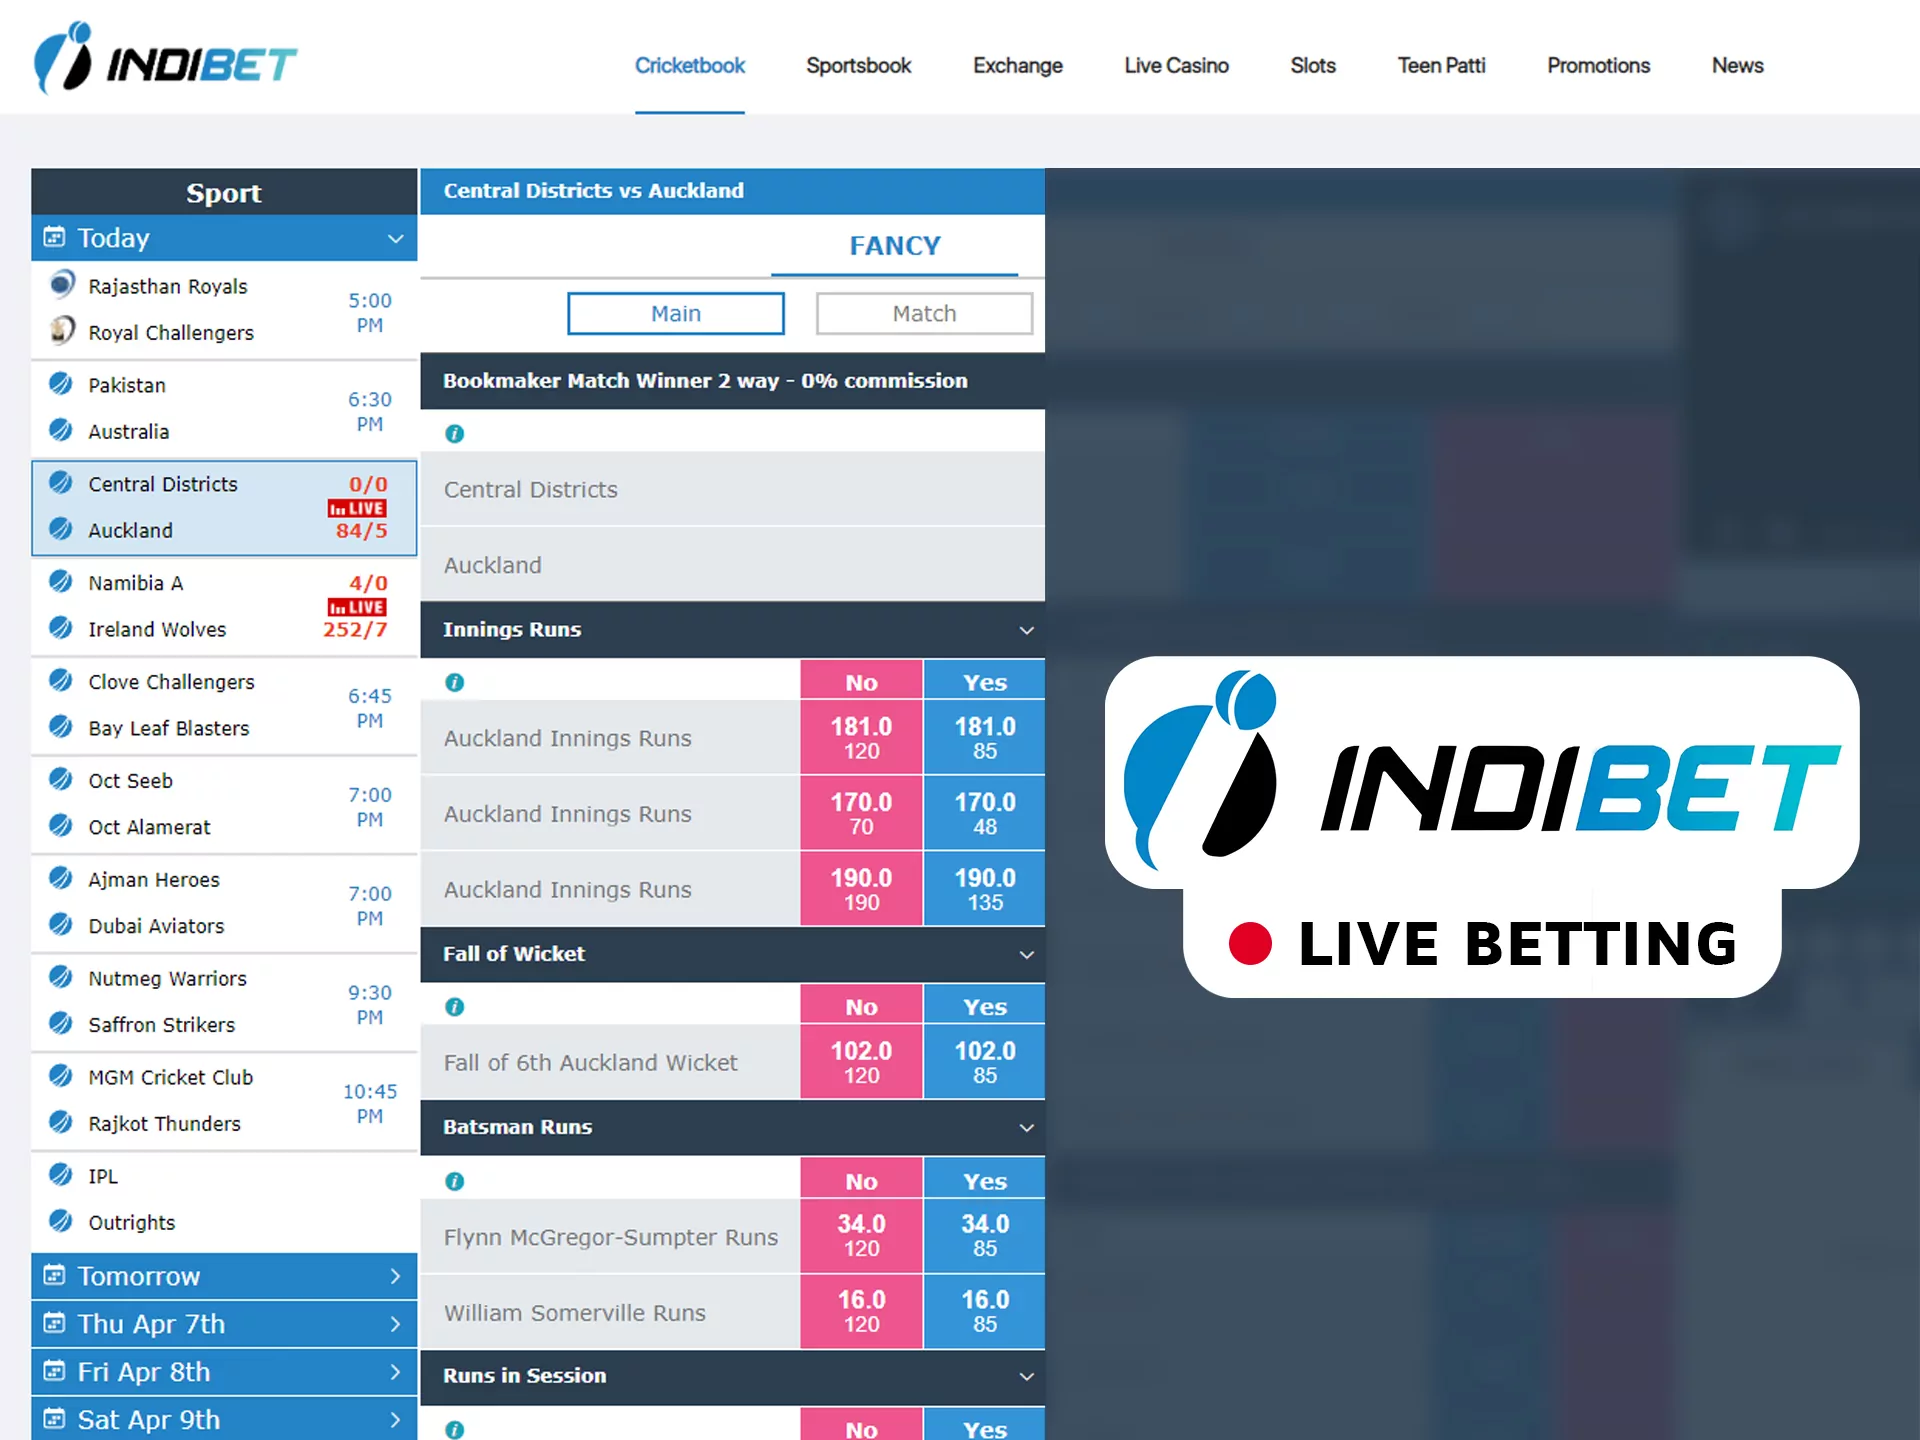 Bet in live at Indibet.